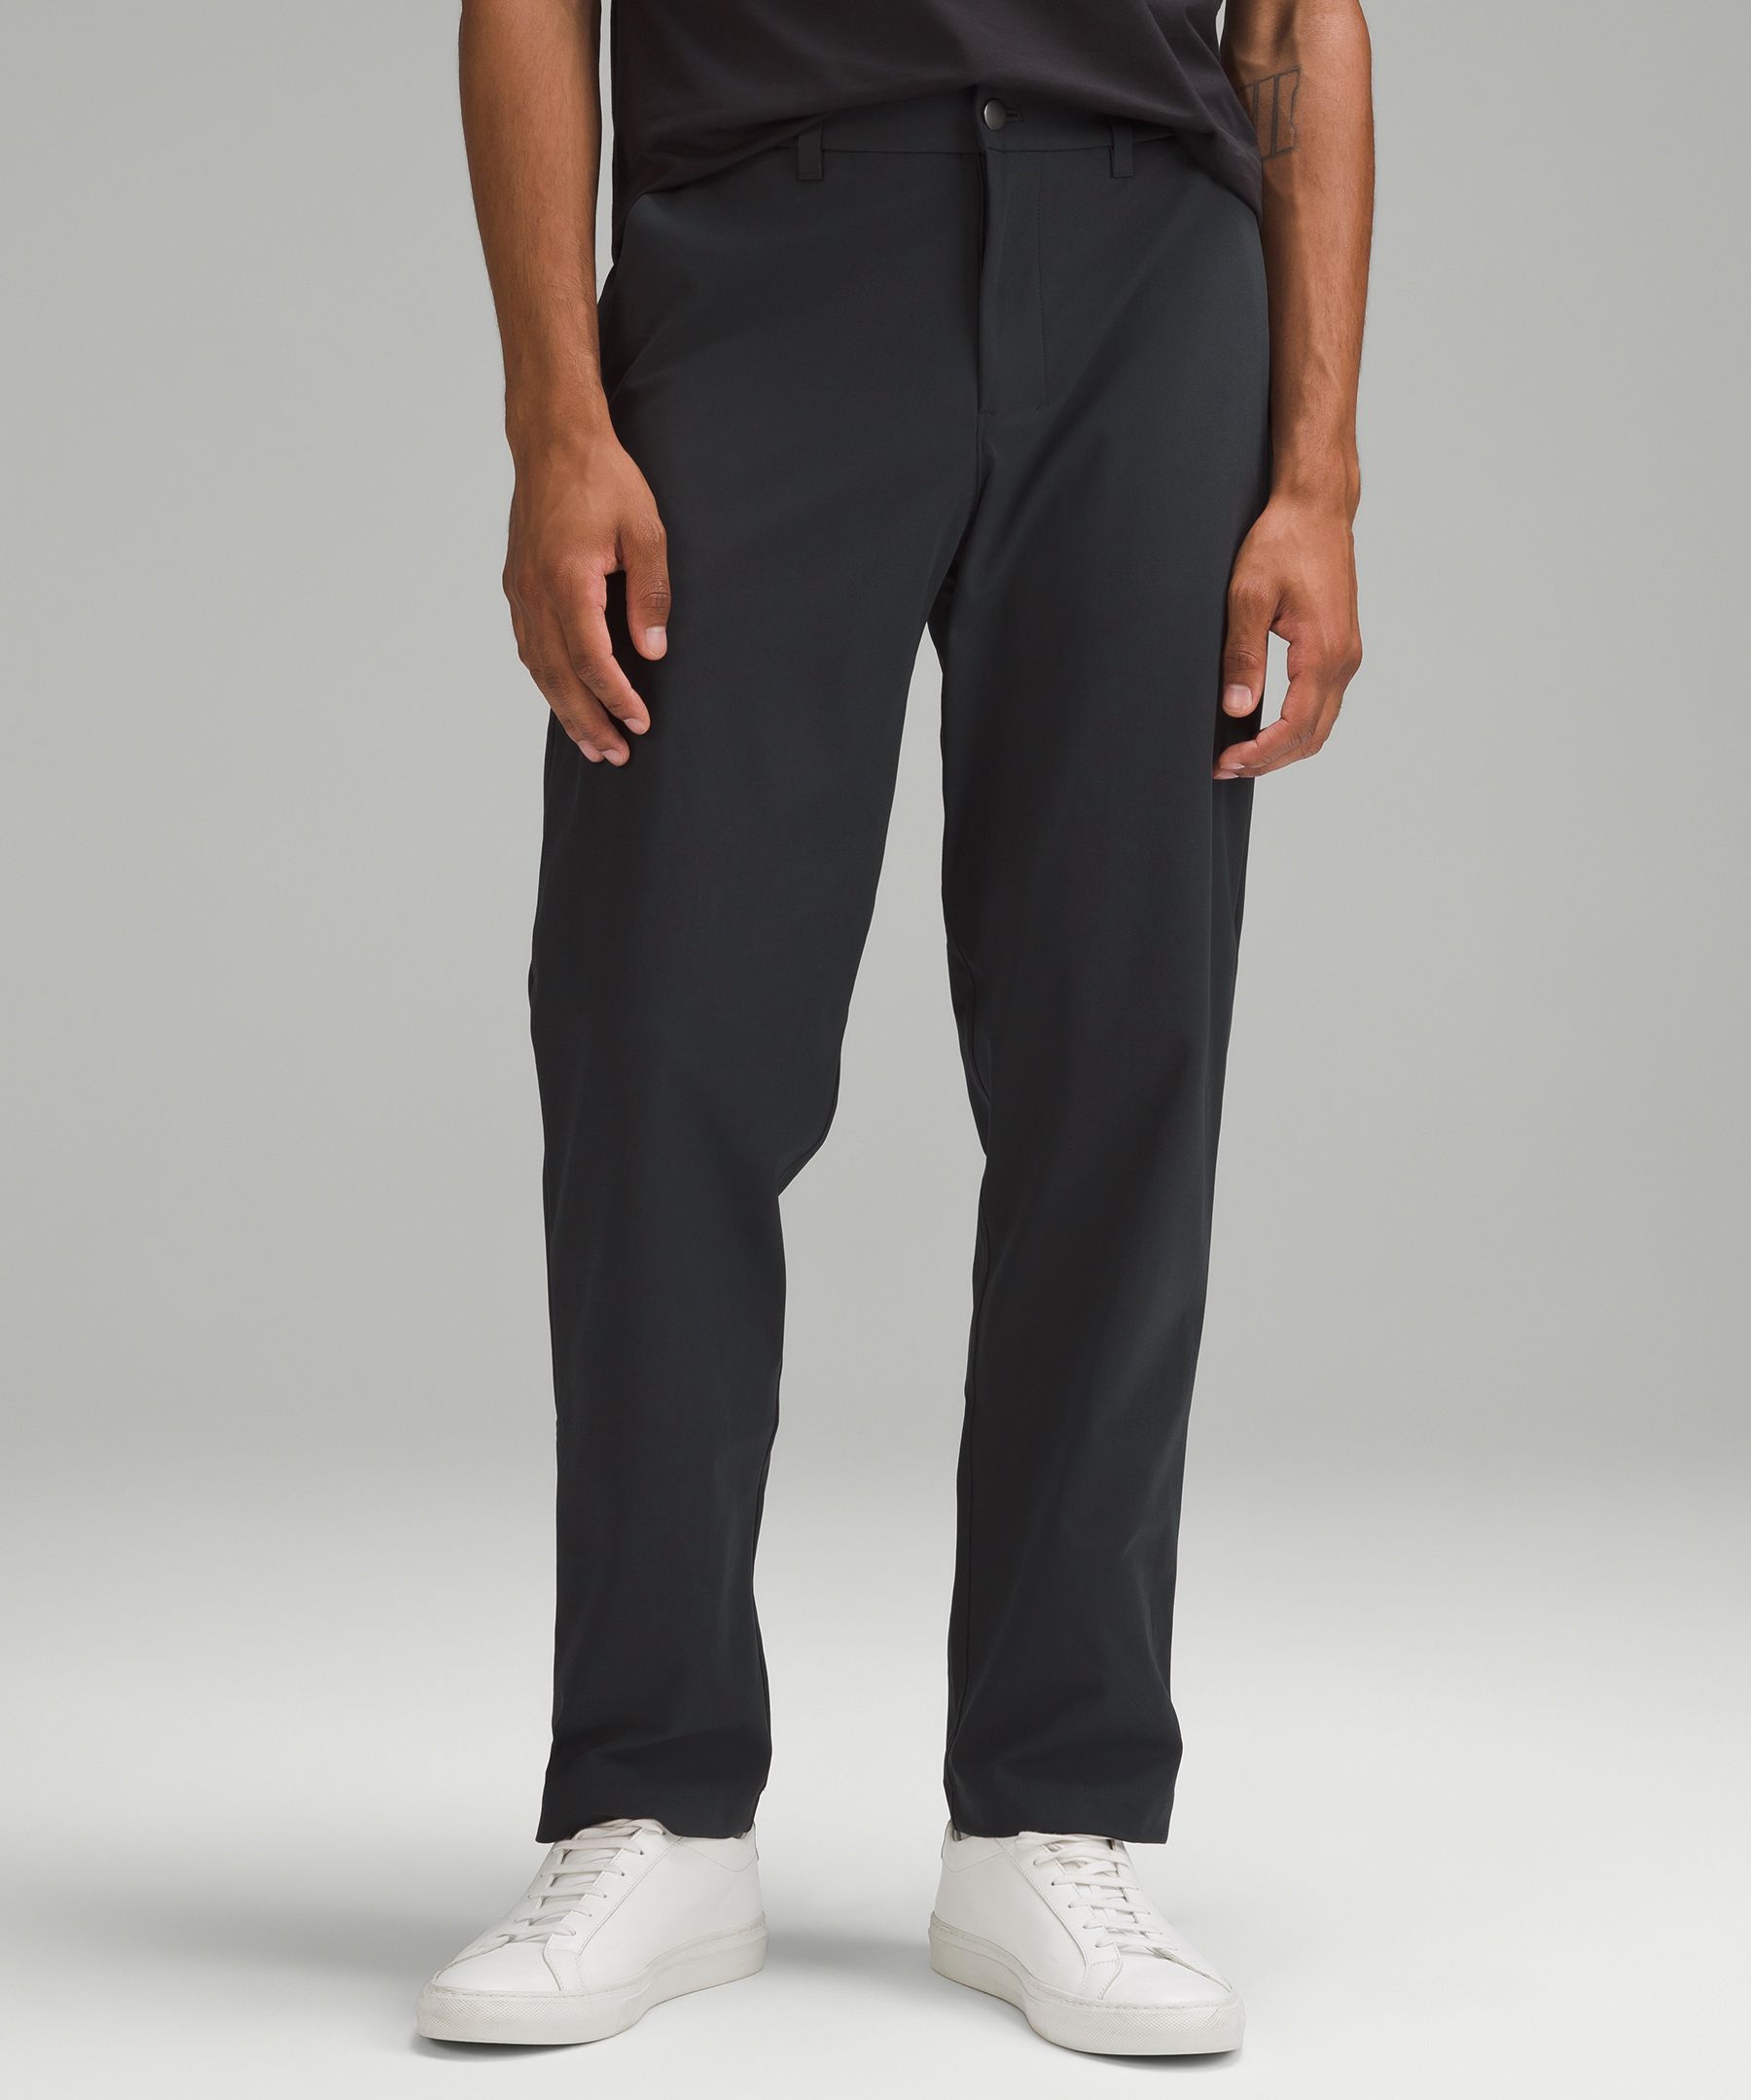 Lululemon Abc Relaxed-fit Trousers 34"l Warpstreme